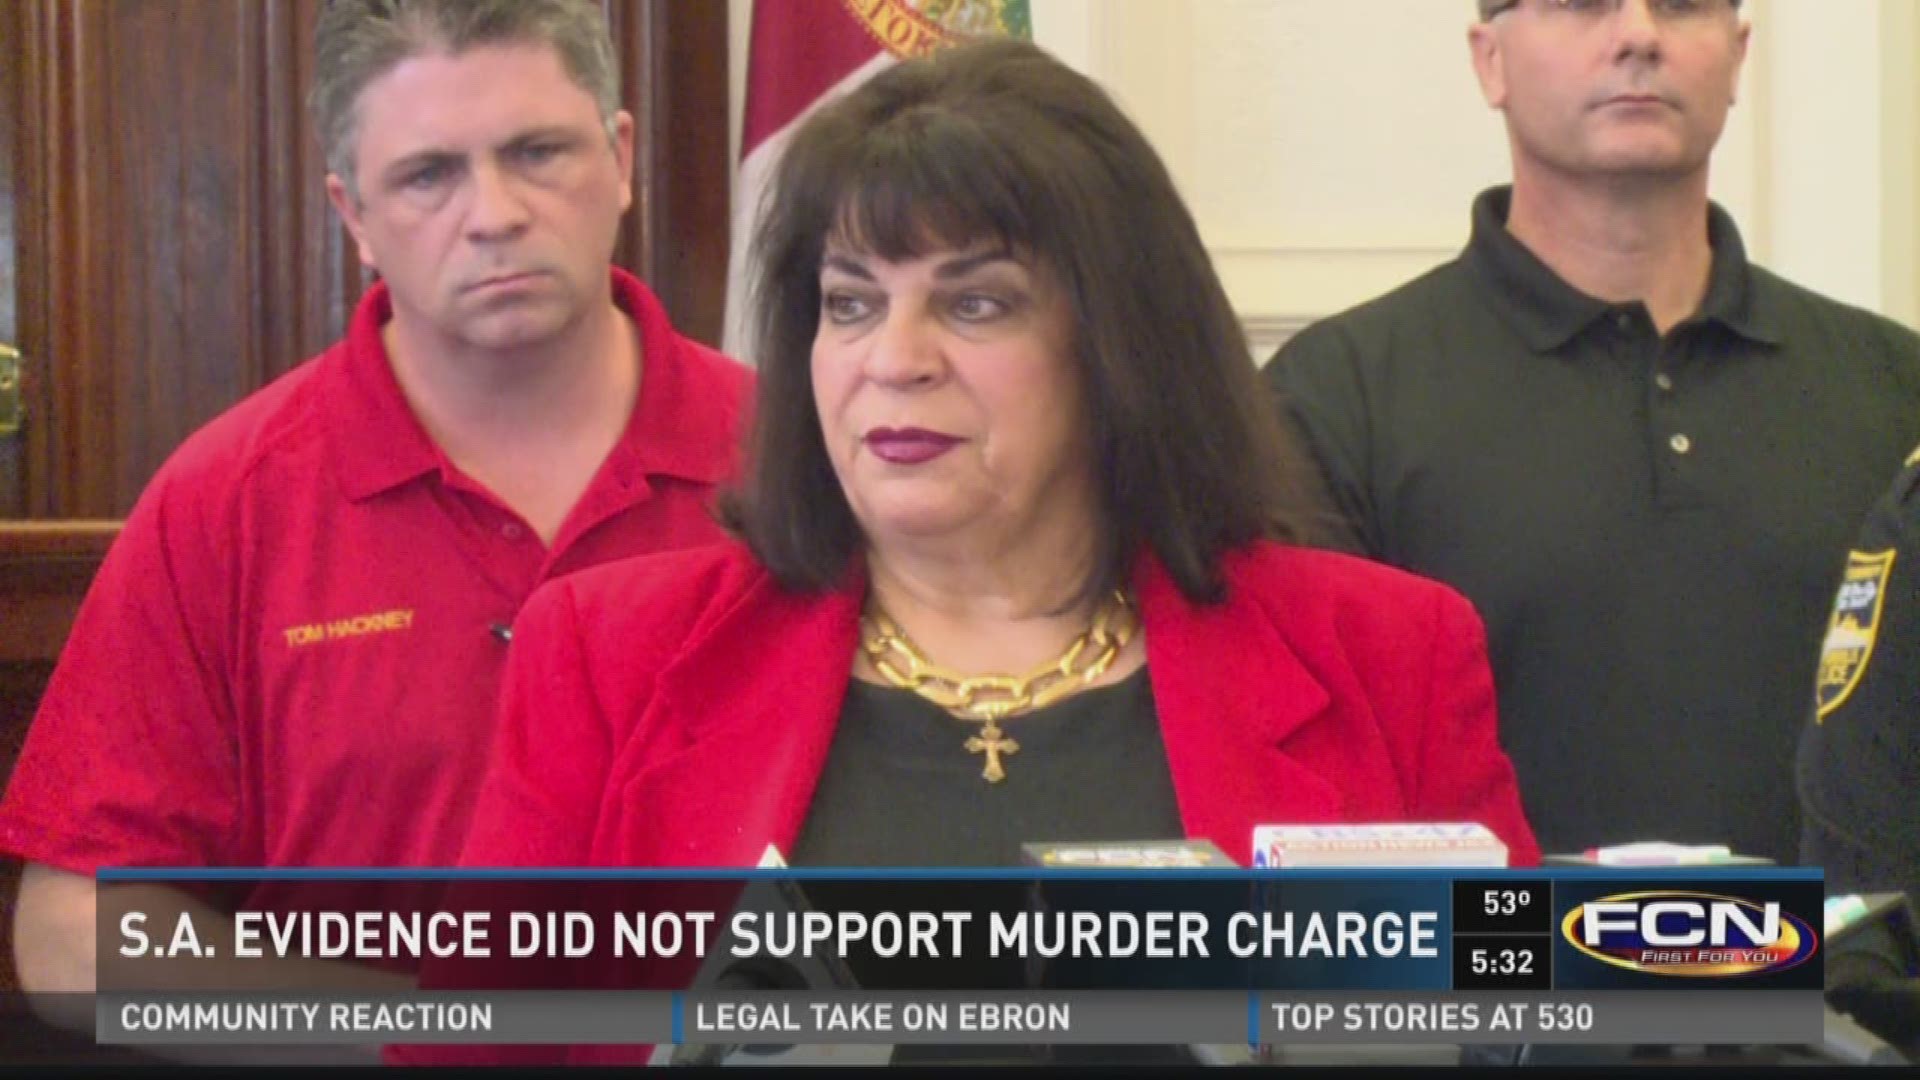 S.A. evidence did not support murder charge